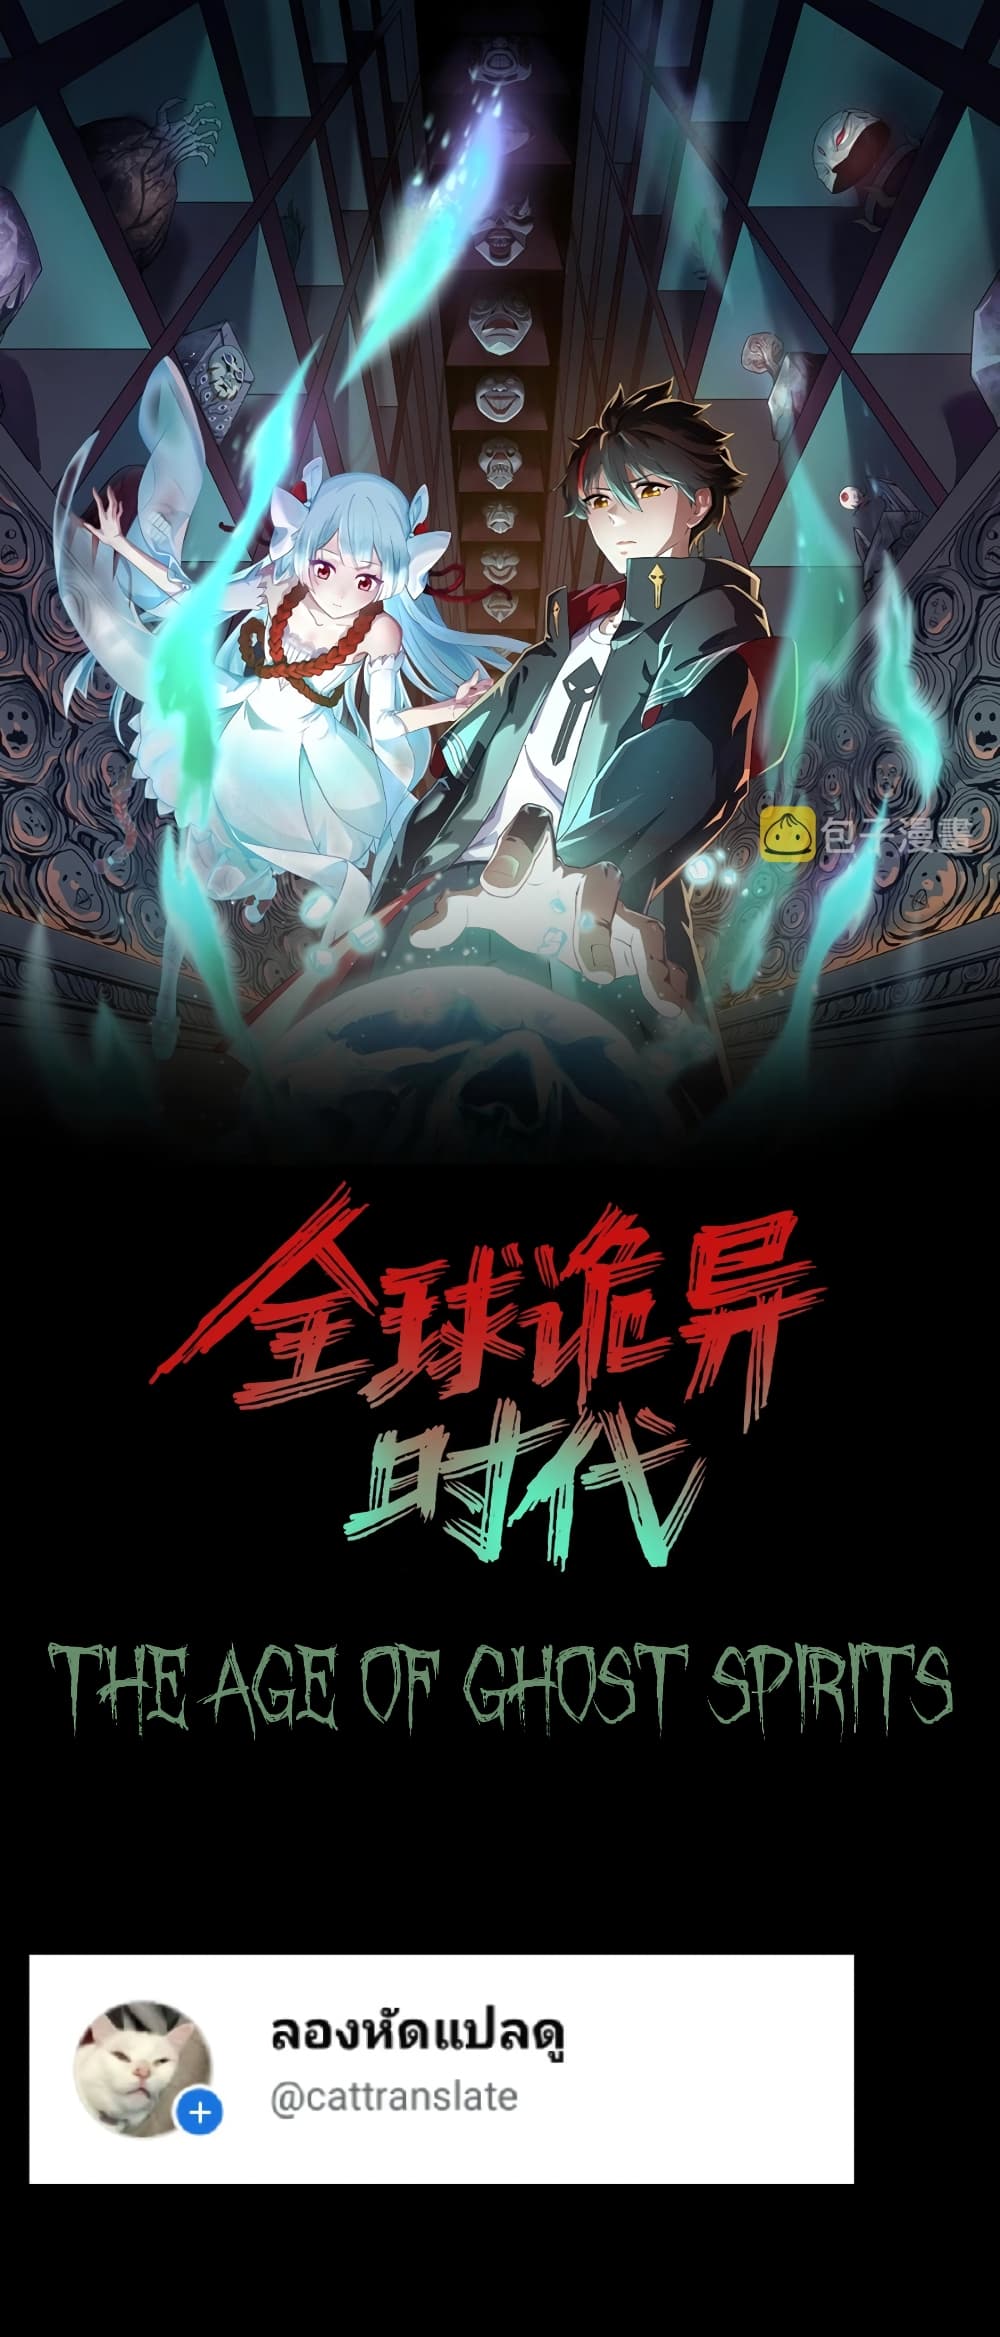 The Age of Ghost Spirits à¸à¸­à¸à¸à¸µà¹ 45 (1)